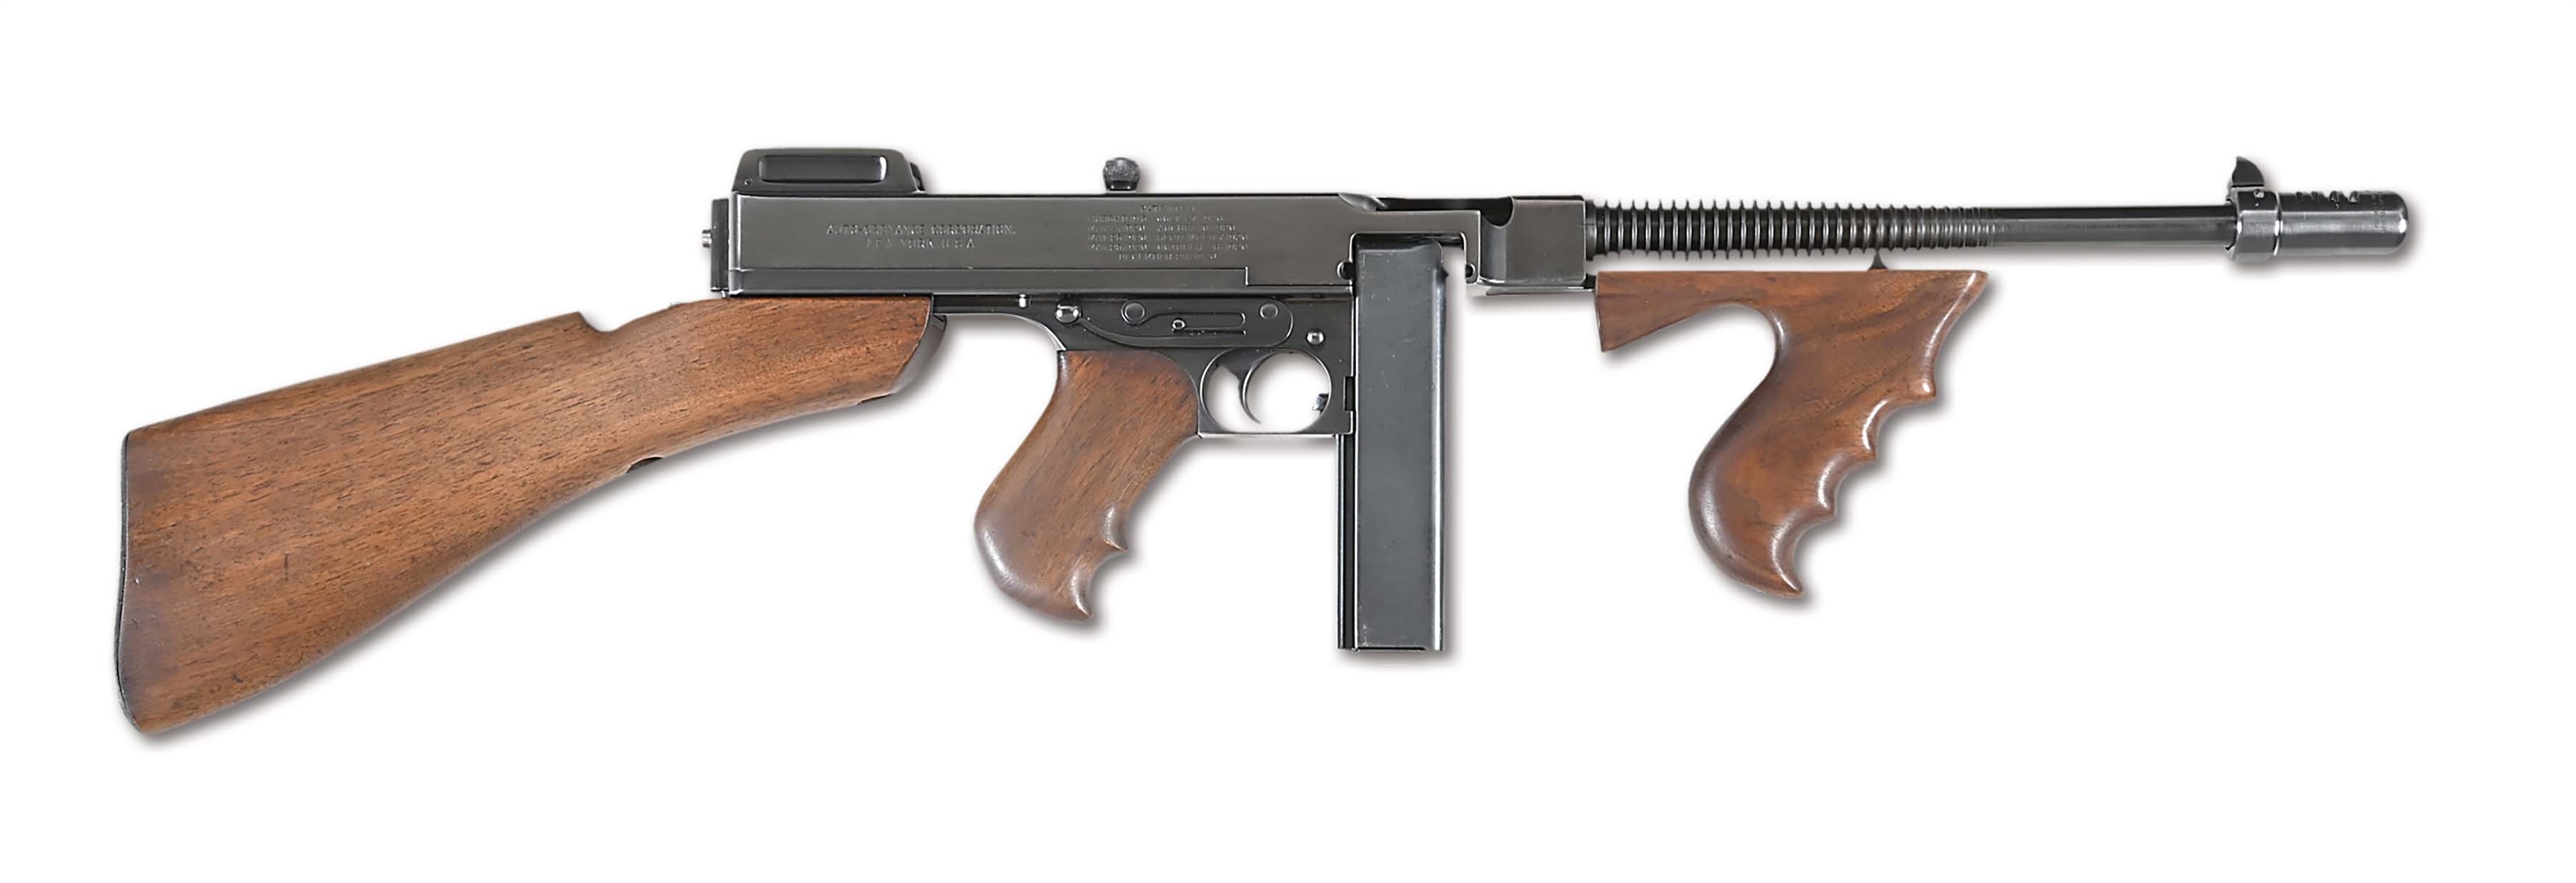 (N) COLT US NAVY MODEL 1928 THOMPSON SUBMACHINEGUN (CURIO AND RELIC).